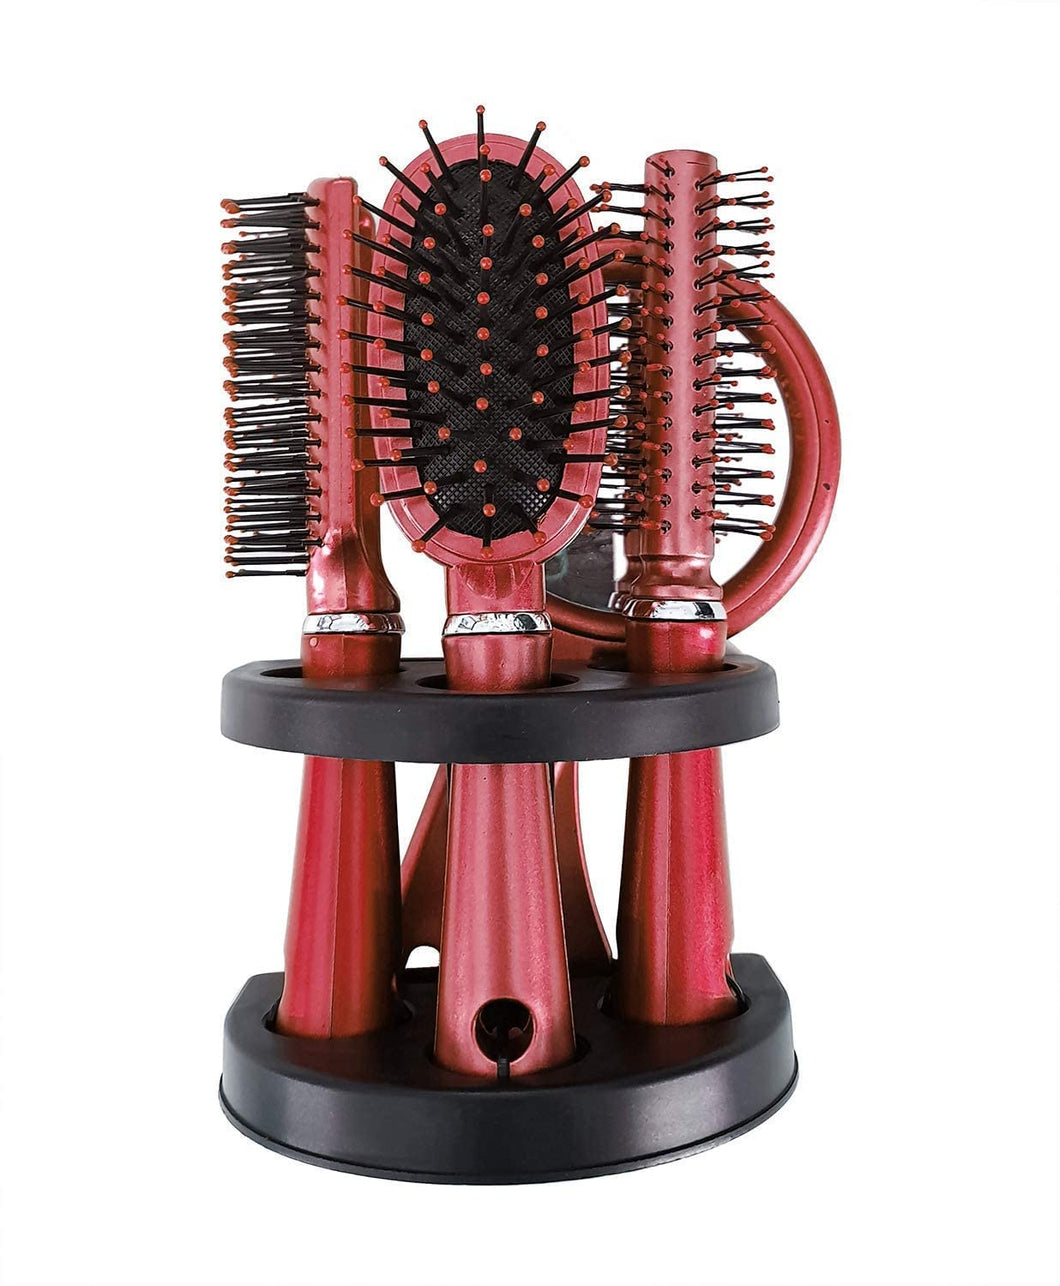 5 Pcs Salon Styler Women Girls Hair Brushes Comb Set For Hair Care With Mirror And Holder Stand And Paddle Hair Brush (Randomly Color)